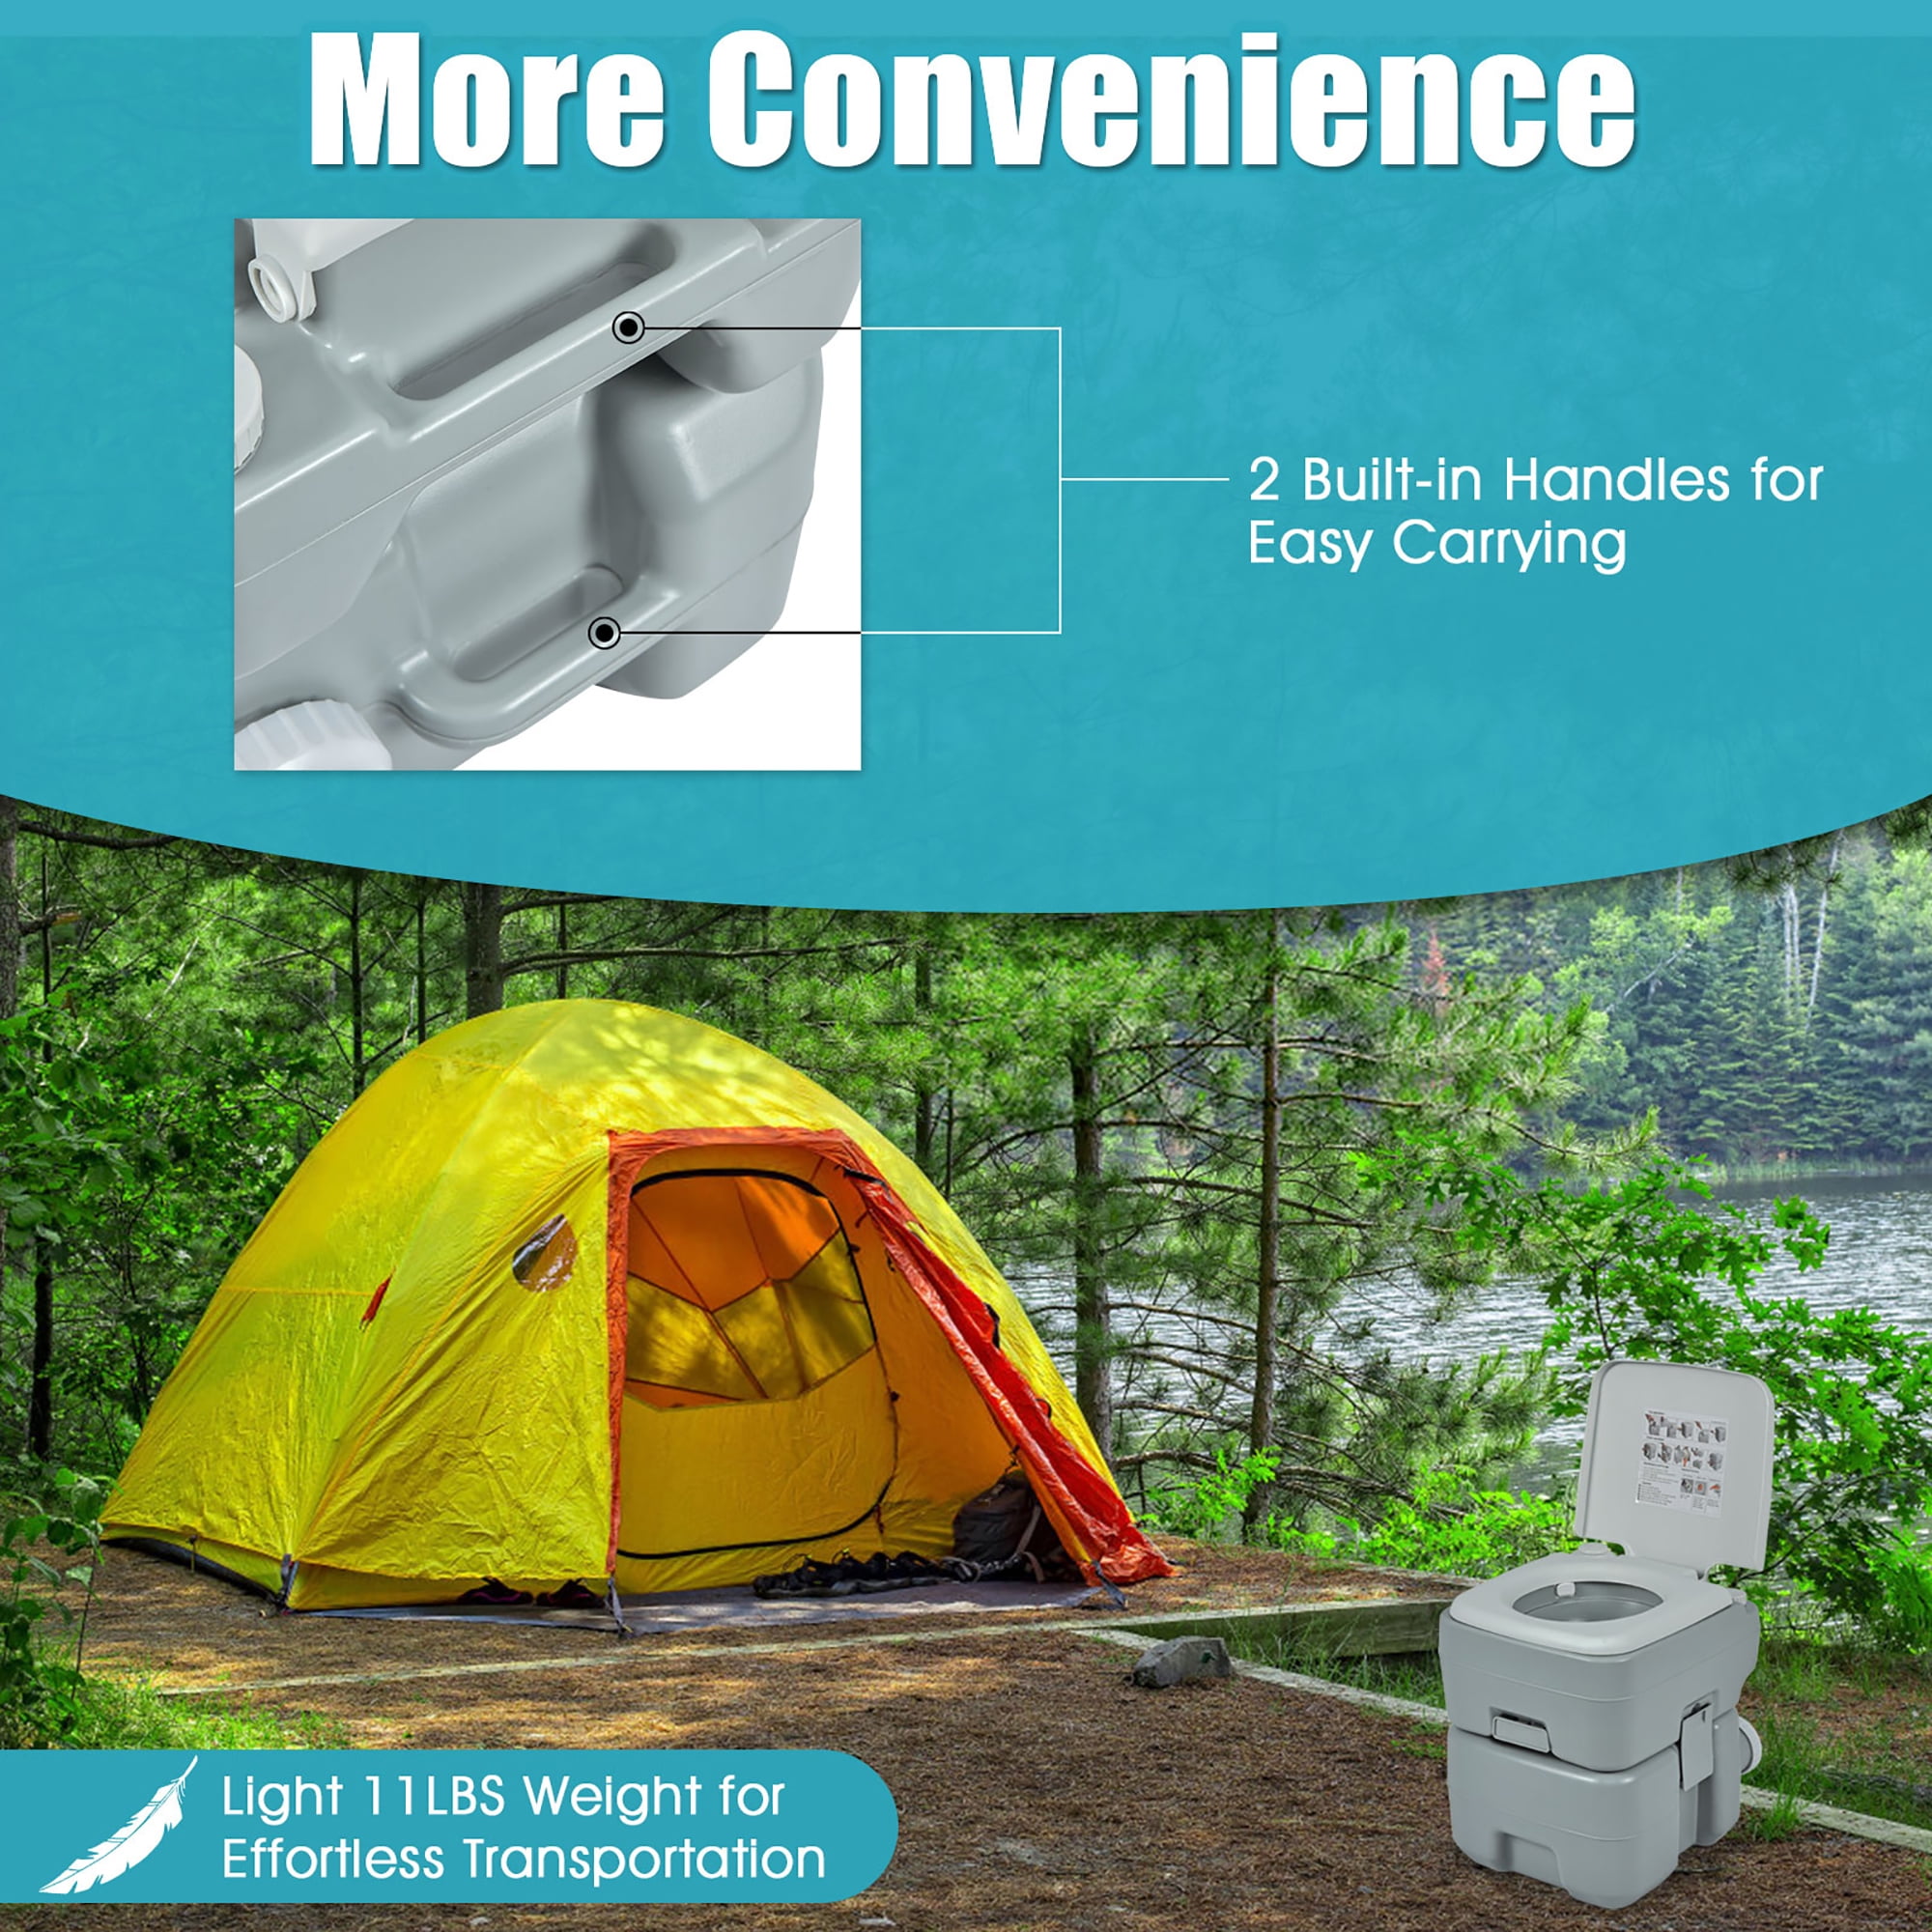 Costway 5.3 Gallon 20l Portable Travel Toilet Camping Rv Indoor Outdoor  Potty Commode : Target